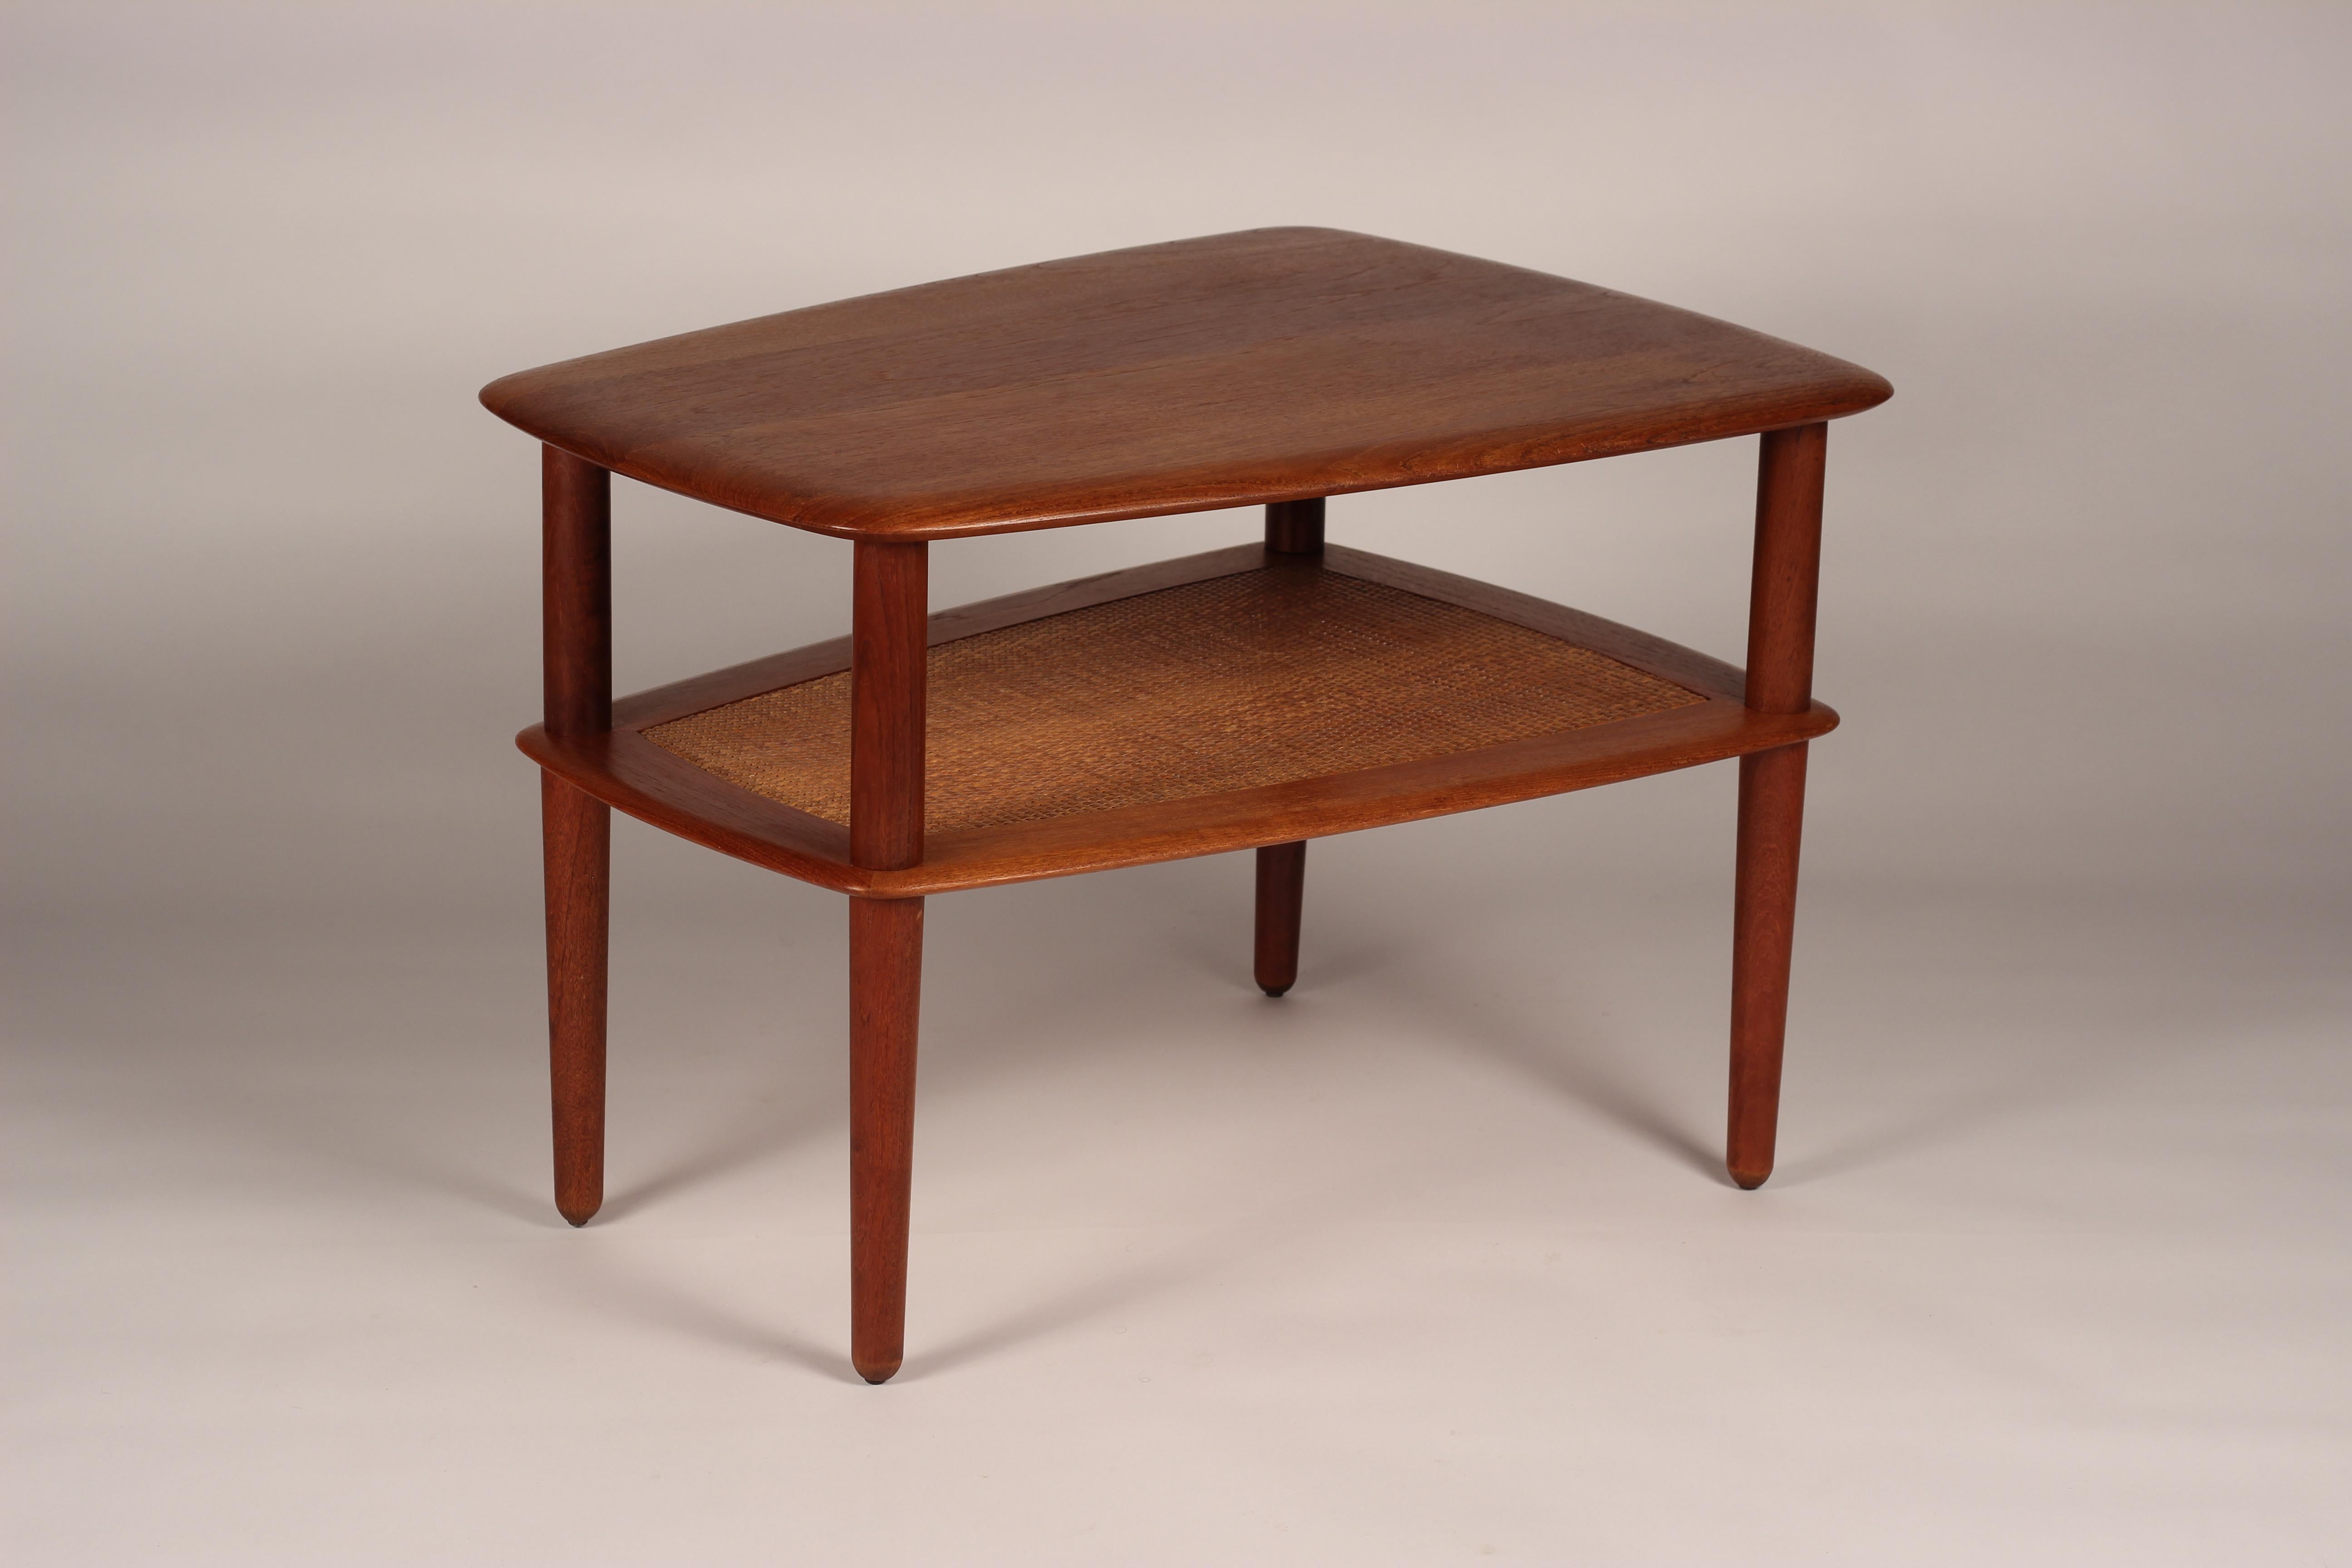 A restored and in good condition, solid teak and caned two-tiered end or side table. Bearing makers mark verso.

We invite you to follow us and look at our Storefront for further 20th Century Design pieces.

General note: Shipping quotes, as